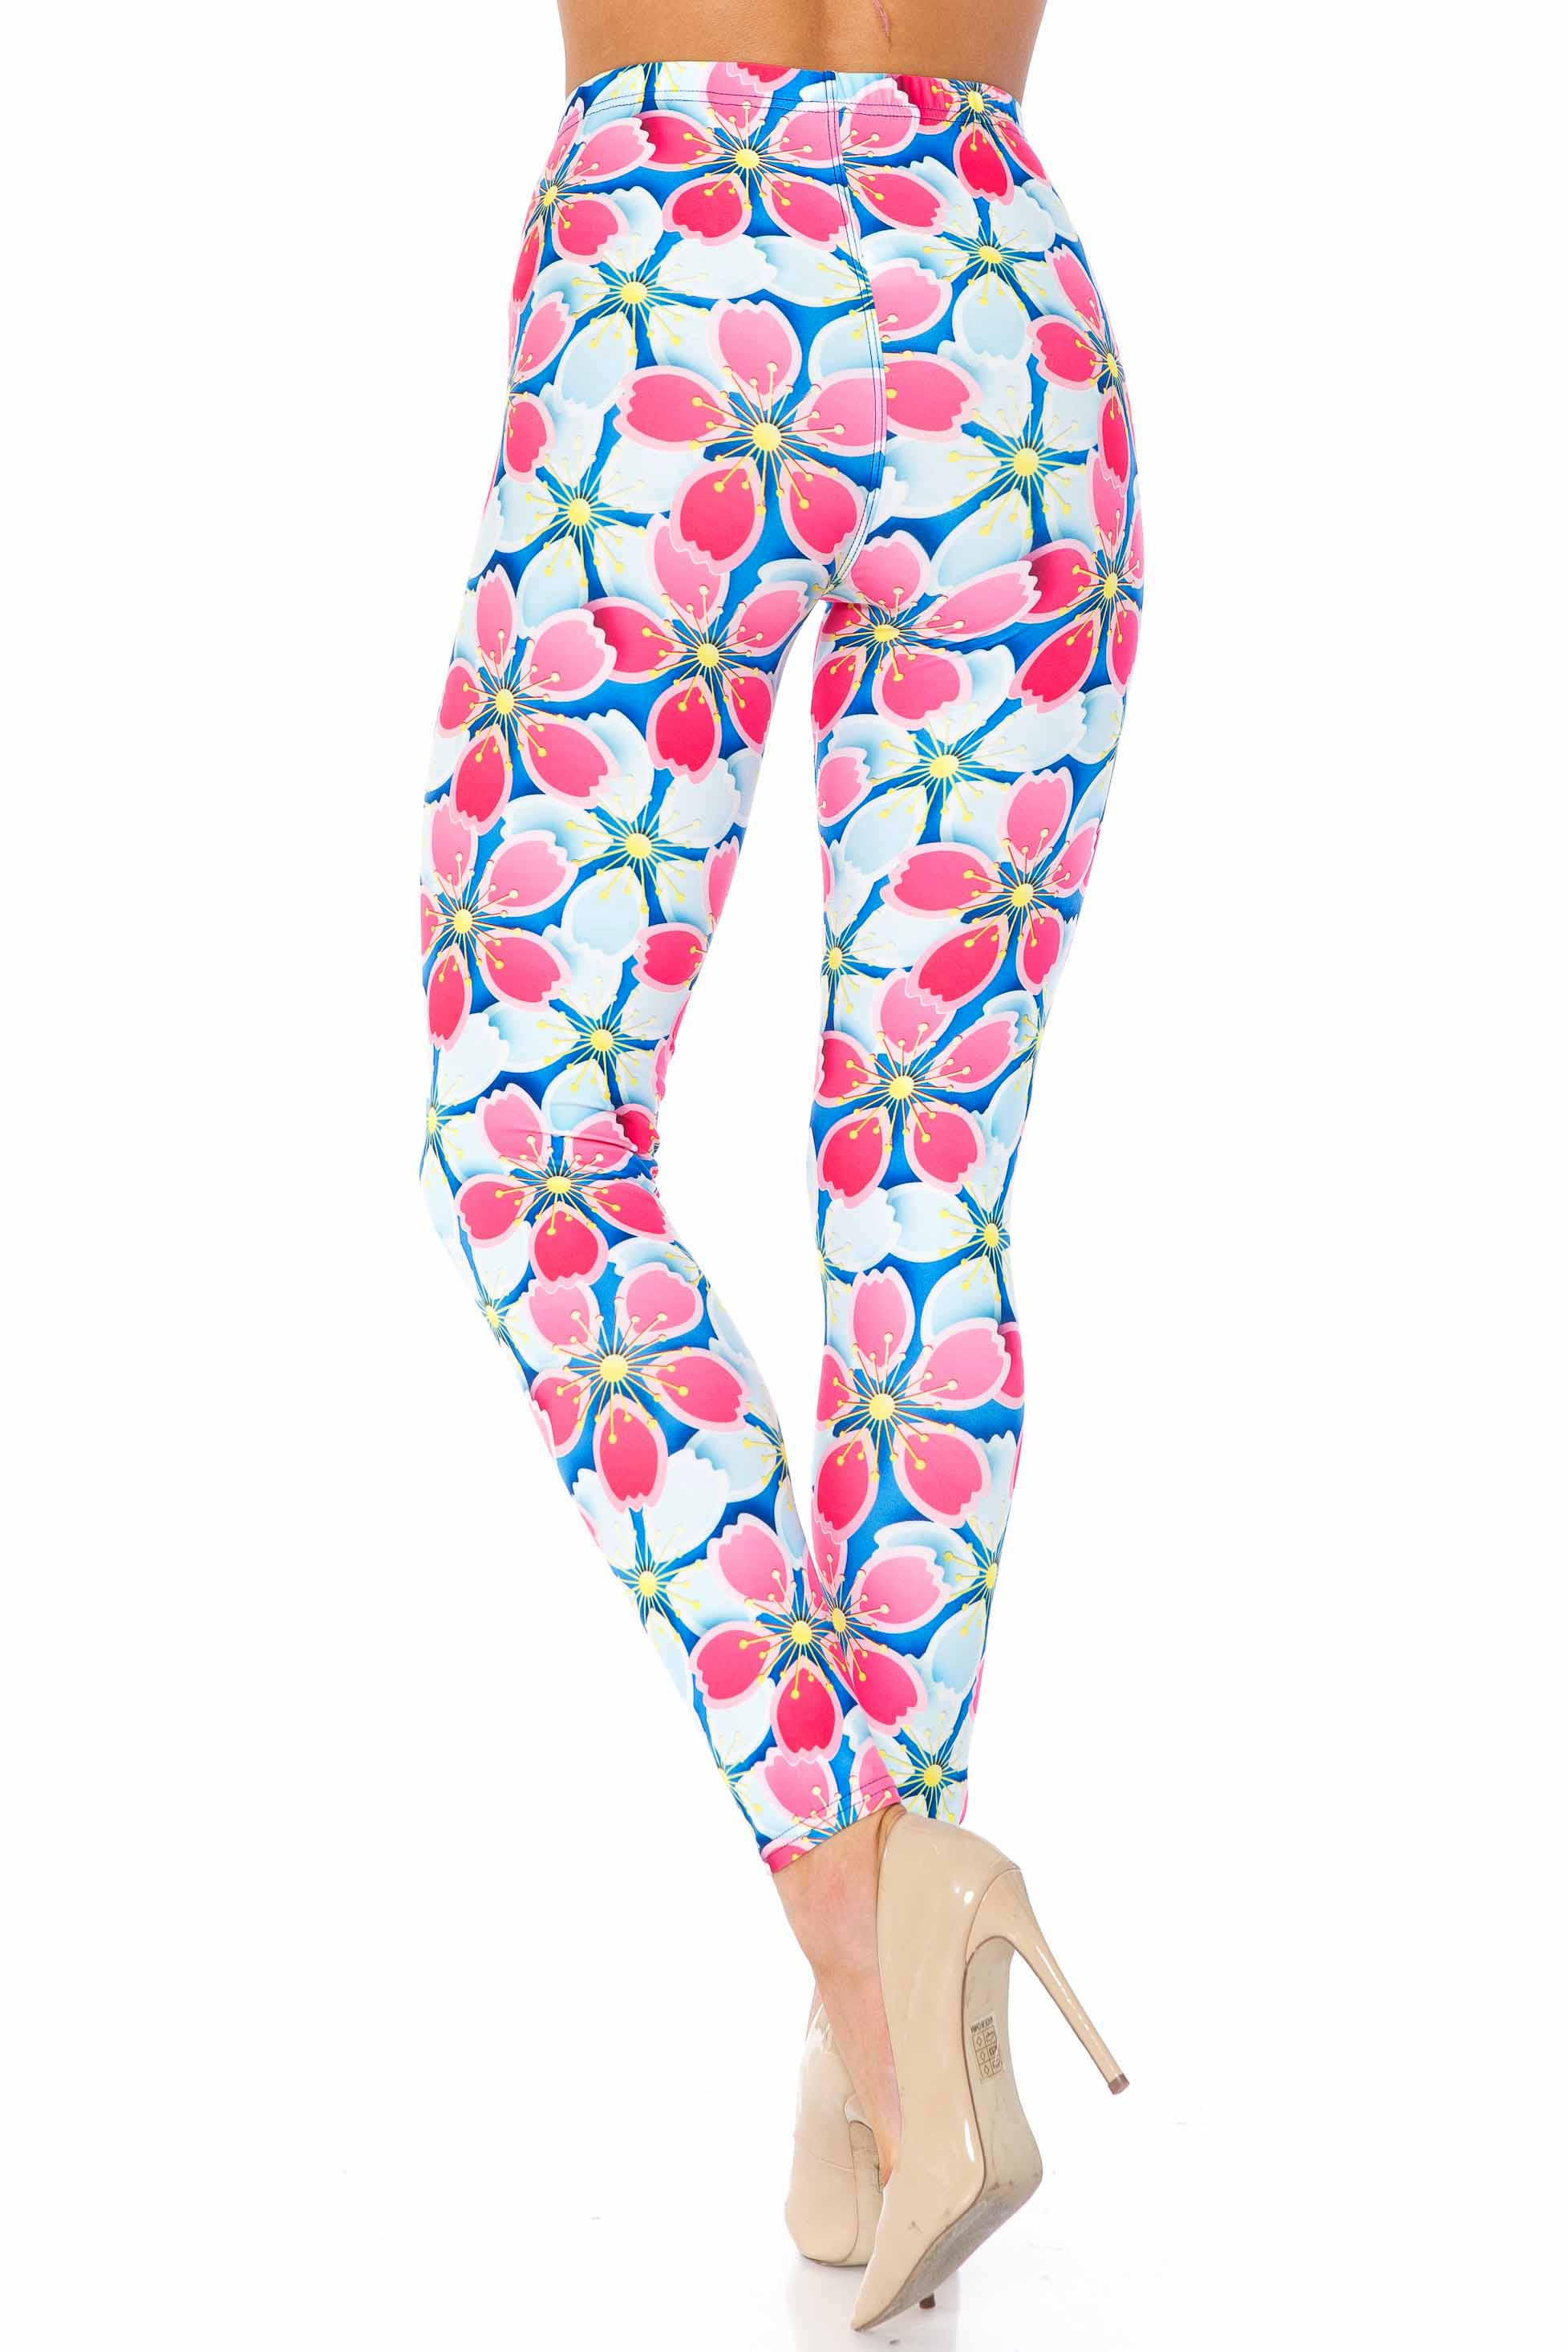 Wholesale Creamy Soft Pink and Blue Sunshine Floral Extra Plus Size Leggings - 3X-5X - USA Fashion™